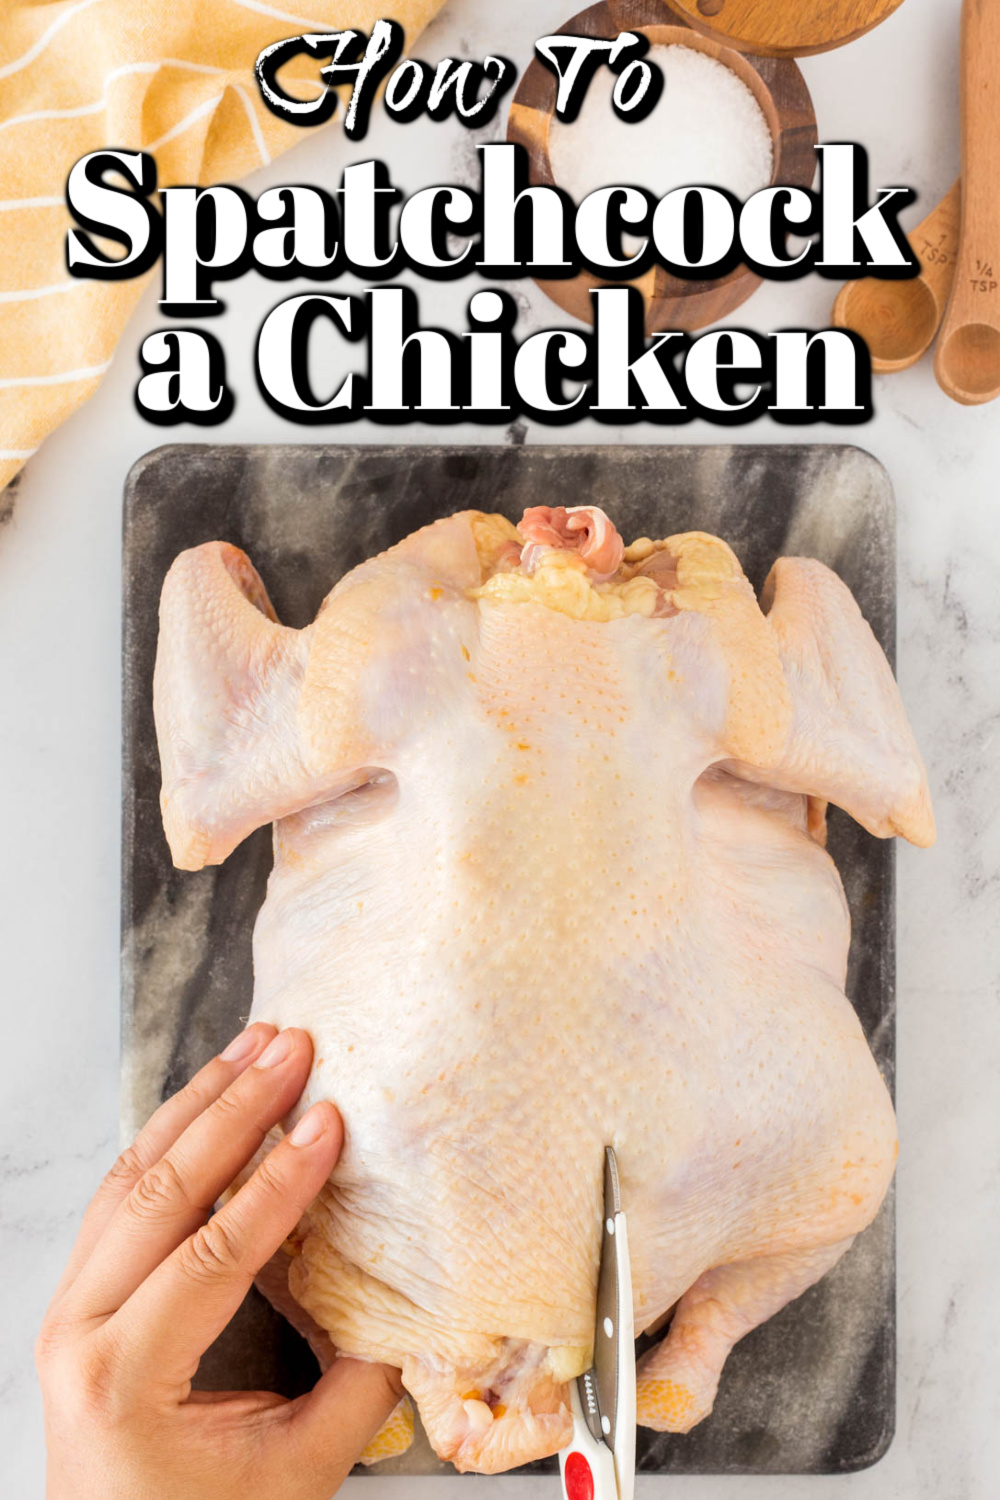 How to spatchcock a chicken is an important kitchen trick to learn, and it's so easy!